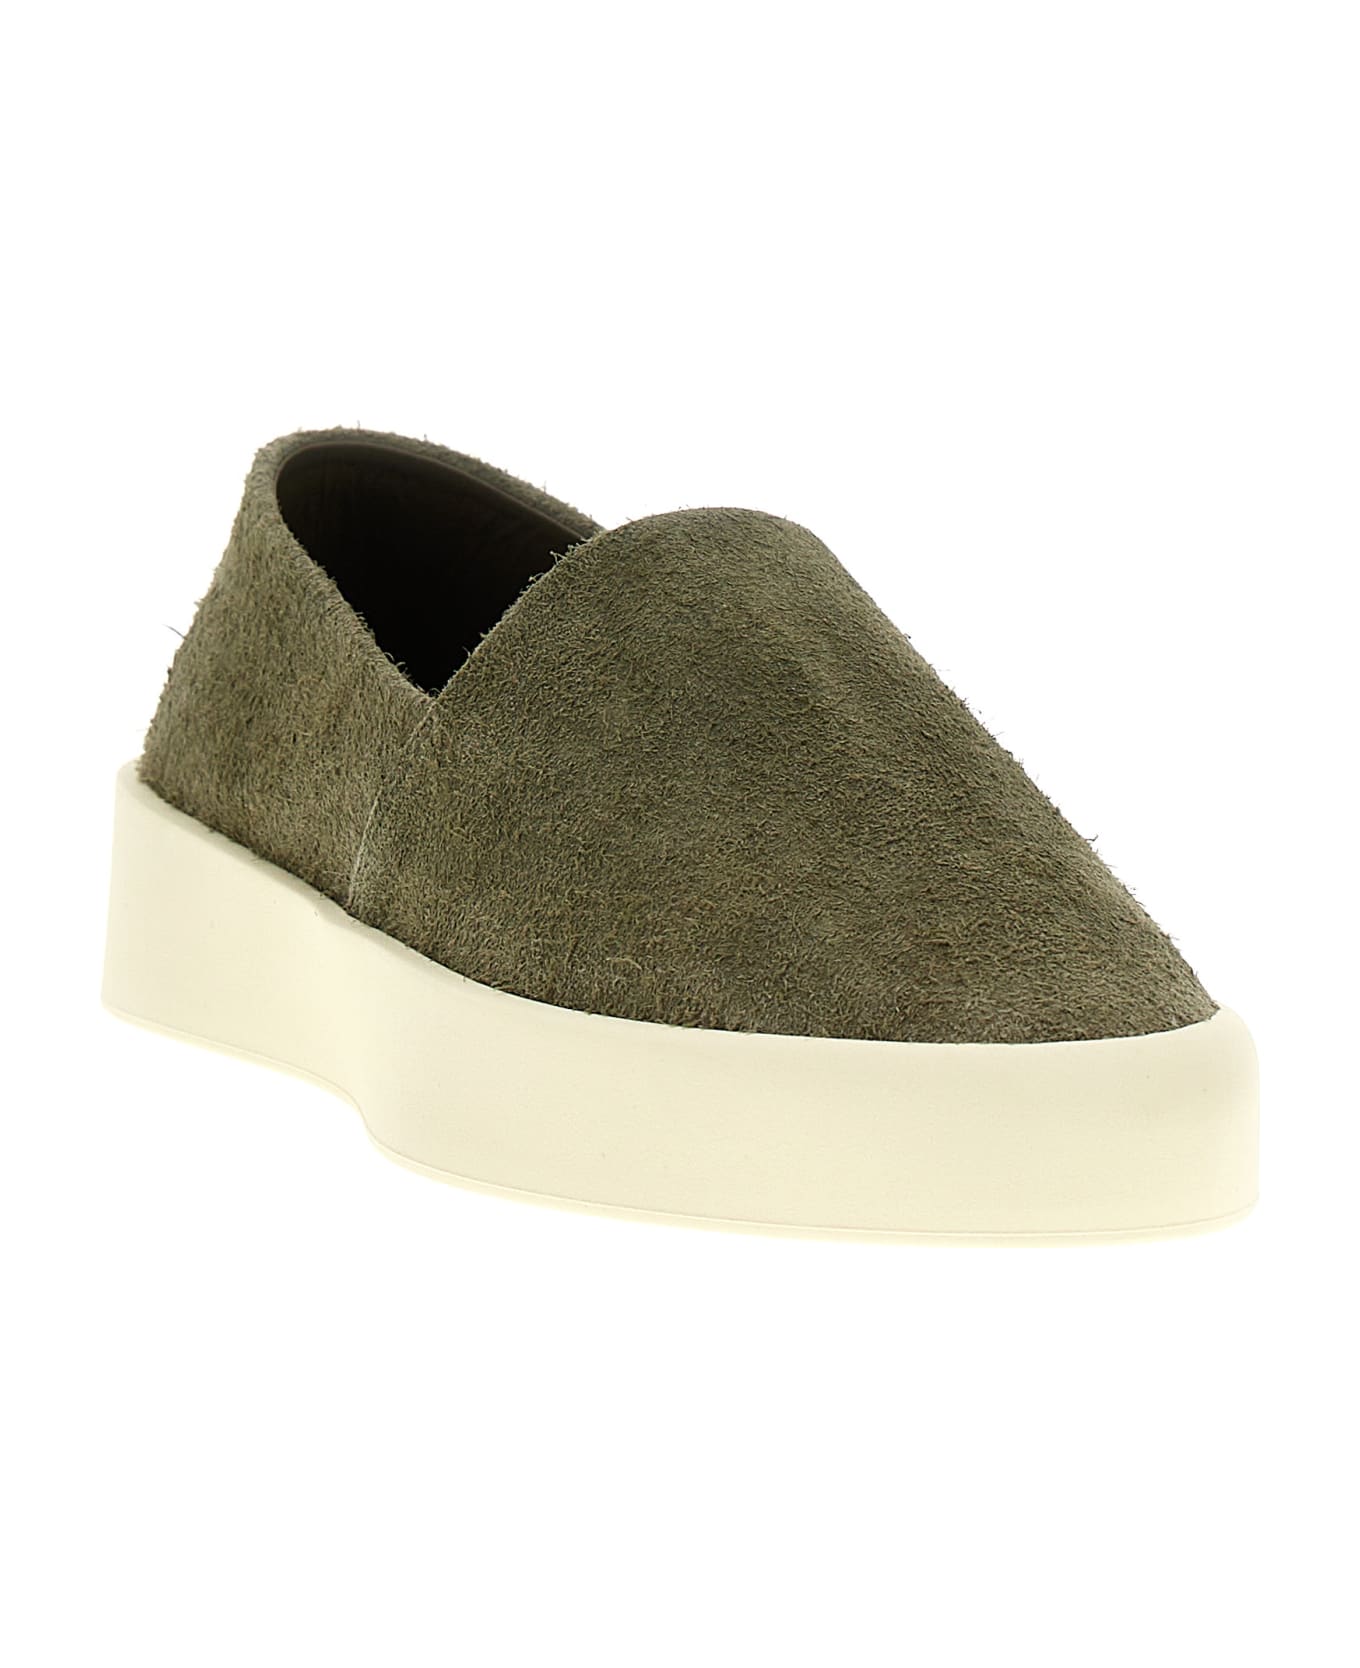 Fear of God 'espadrille' Sneakers - Green スニーカー